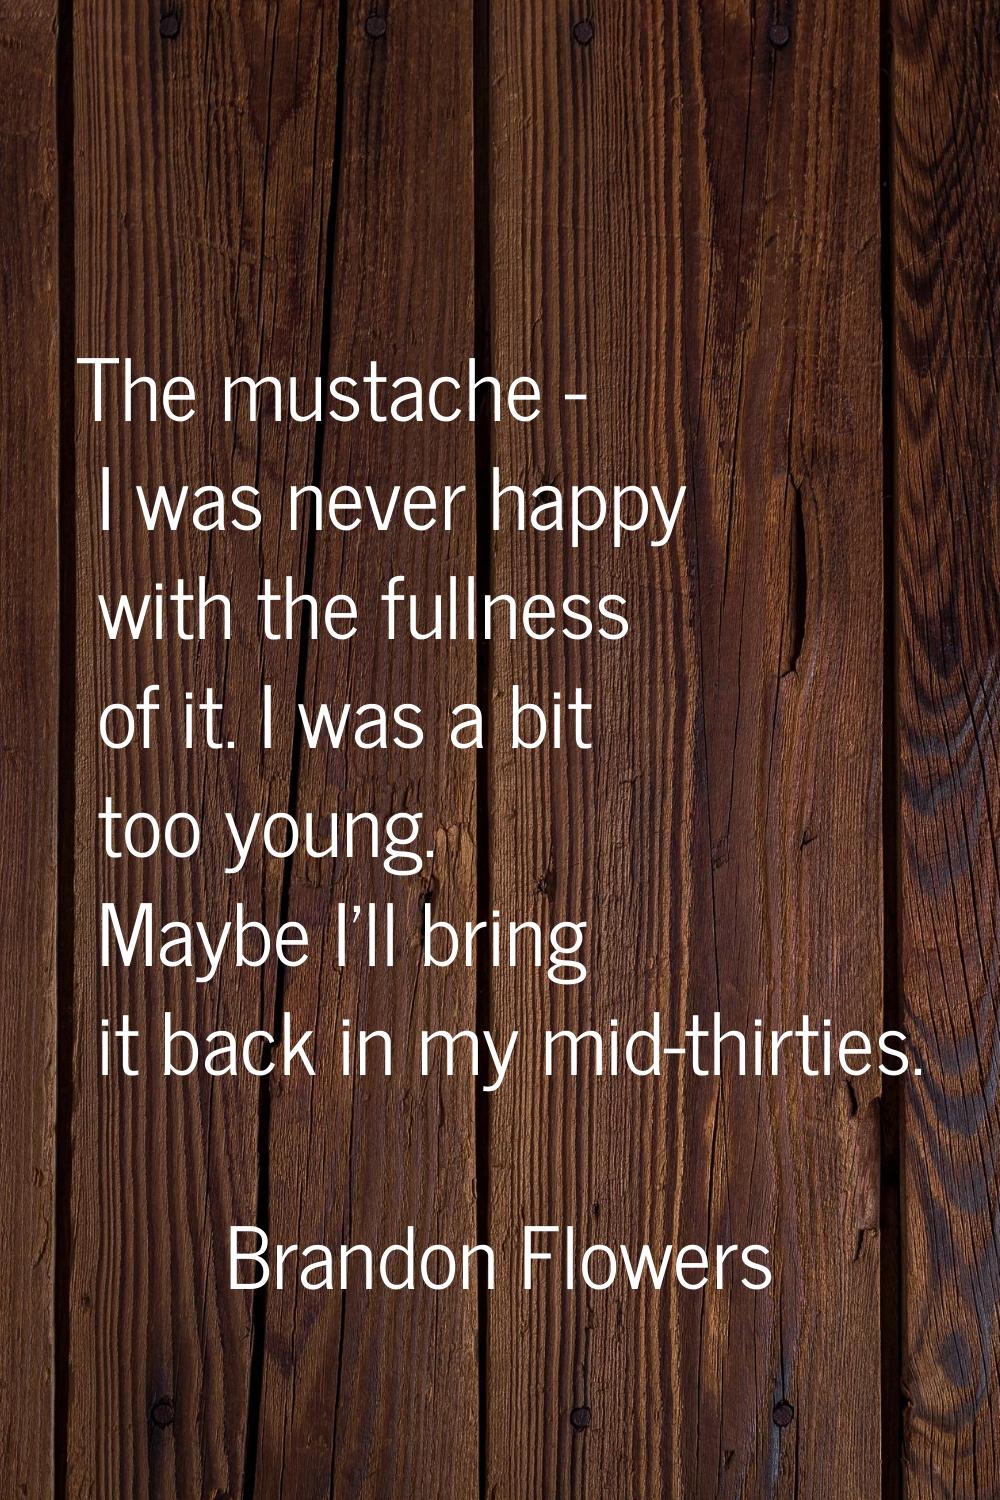 The mustache - I was never happy with the fullness of it. I was a bit too young. Maybe I'll bring i